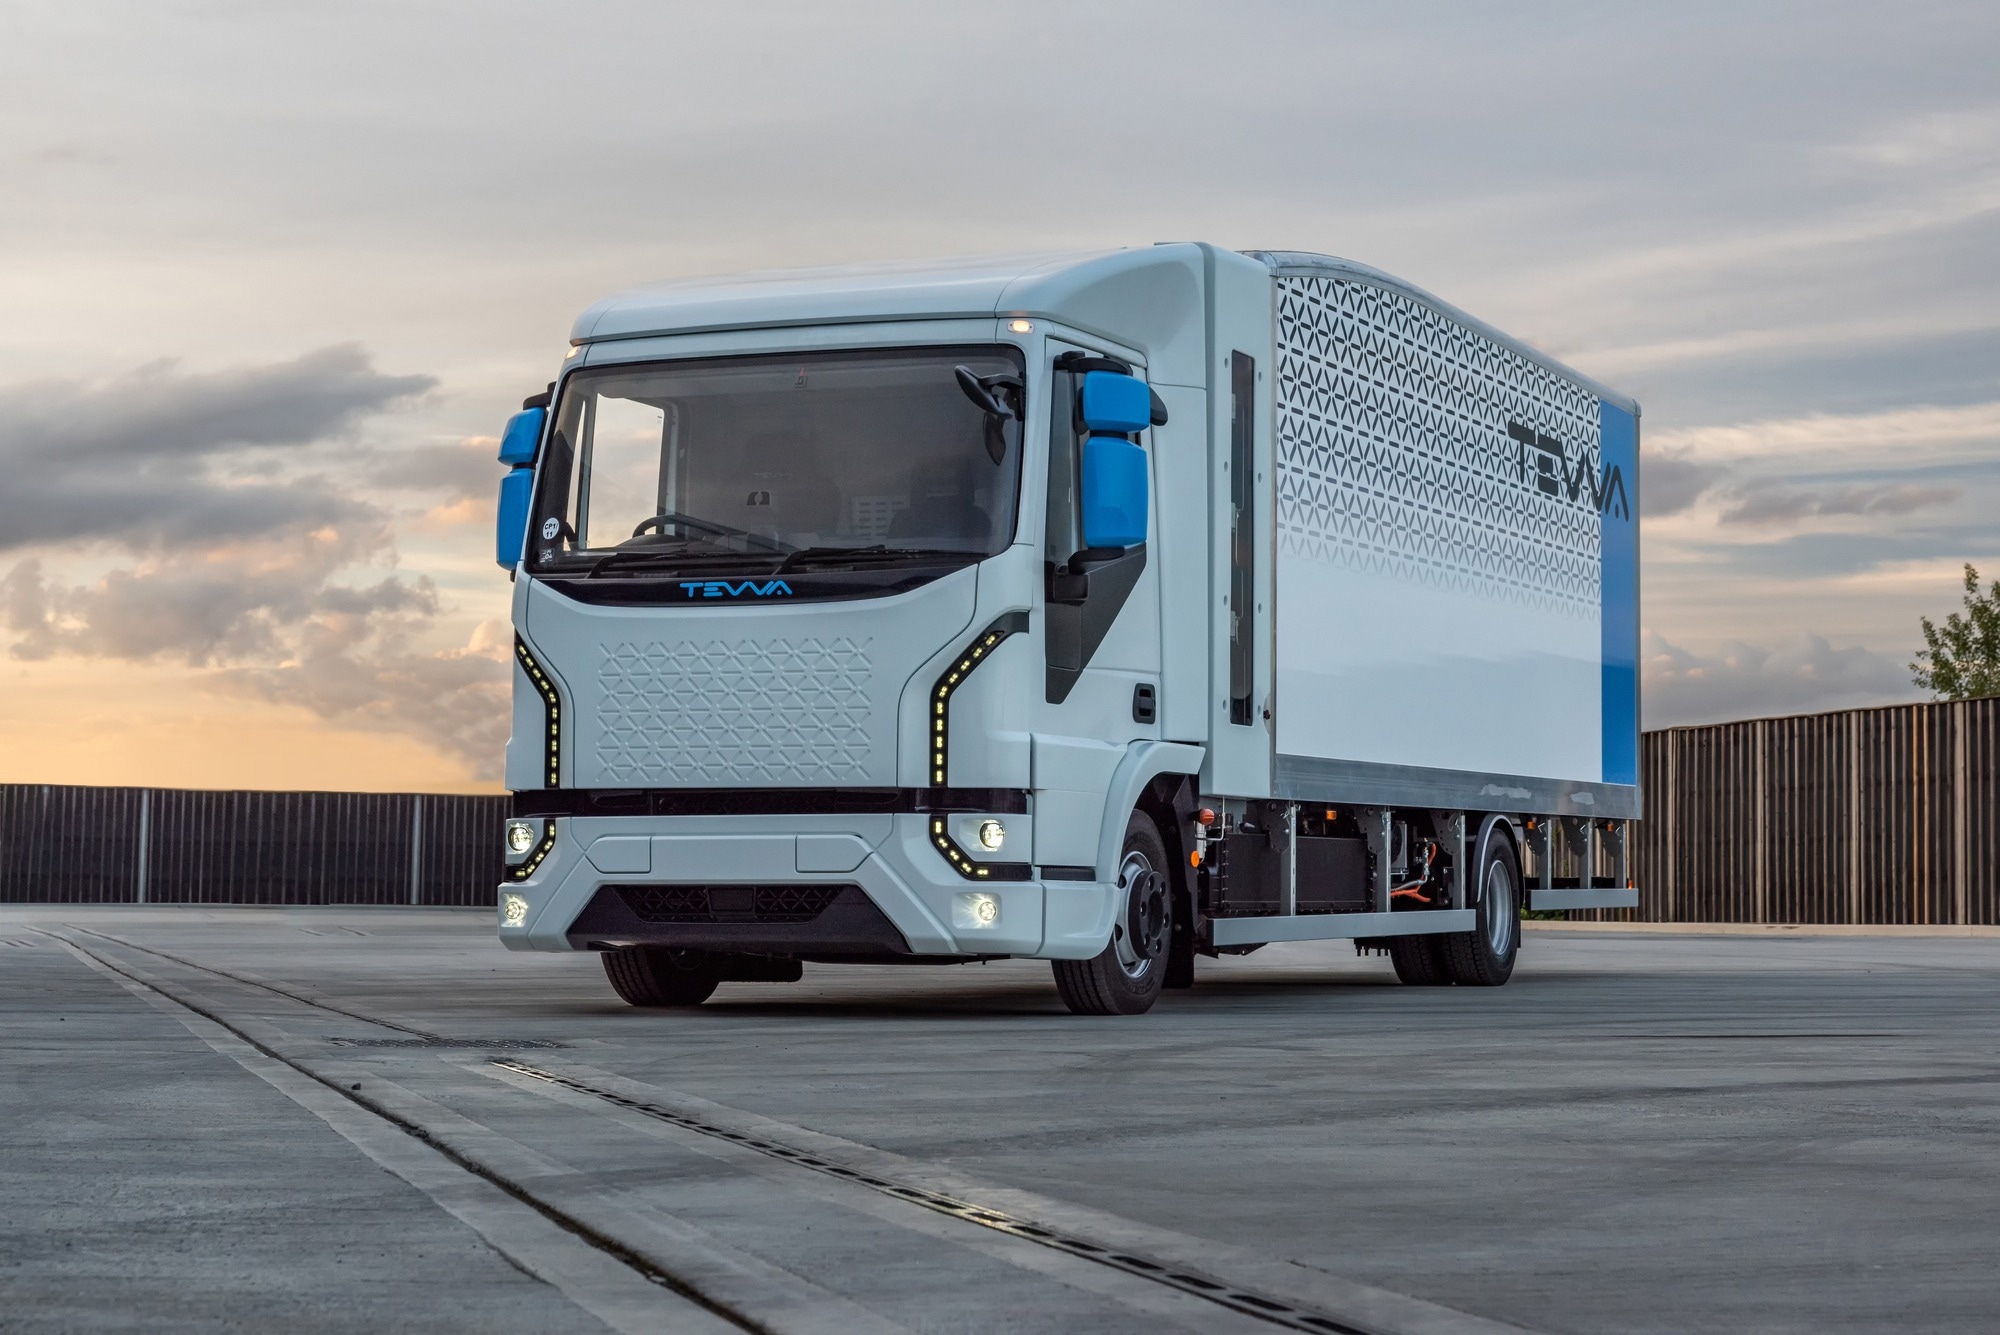 UK’s First Hydrogen-Electric Truck - Featuring Luxfer Gas Cylinders – Launches, in Showcase of Country’s Clean Tech Expertise